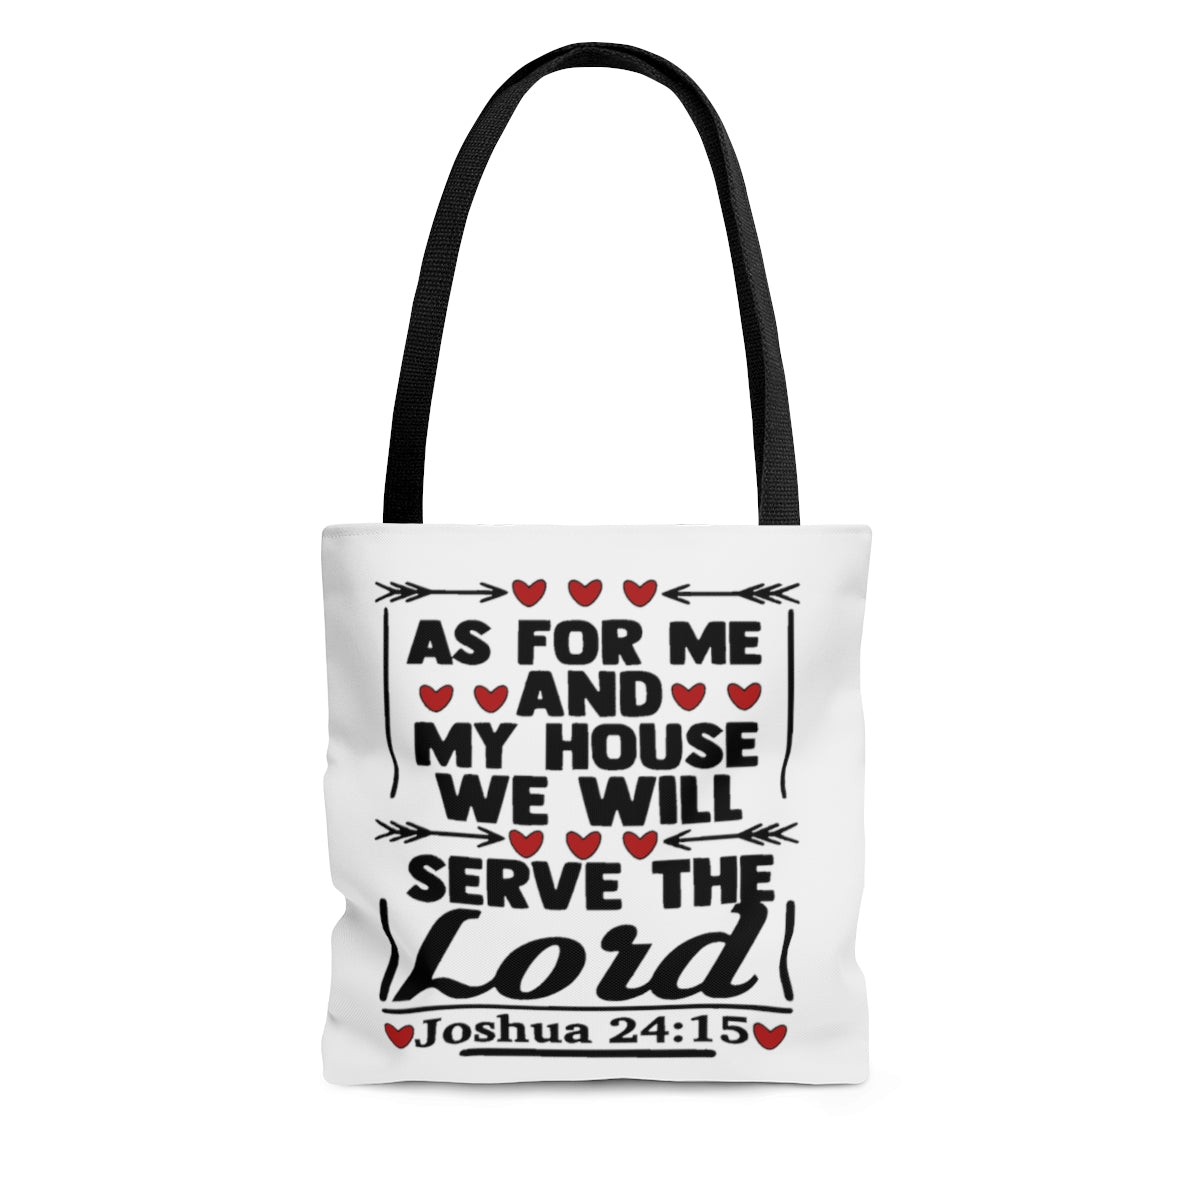 As For Me And My House We will Serve The Lord Jeremiah 24:15 Tote bag